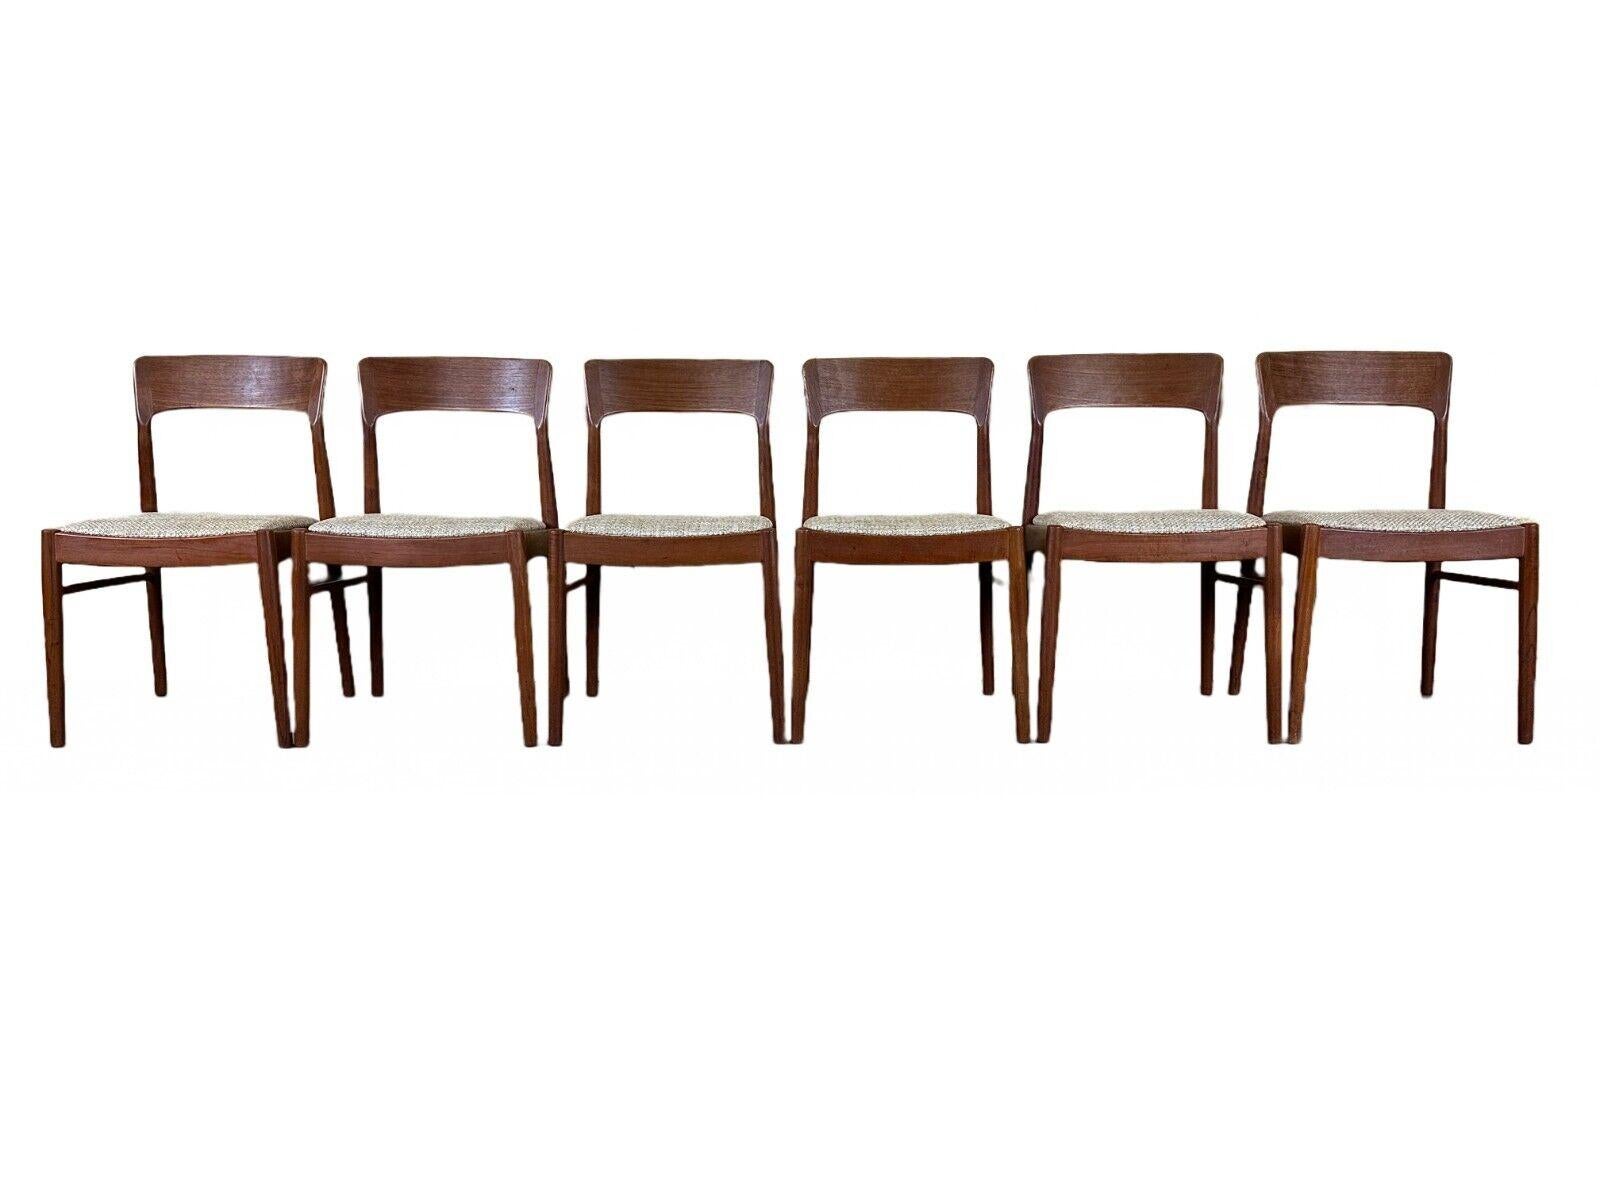 6x 60s 70s teak chairs by Henning Kjærnulf for Korup Stolefabrik

Object: 6x chair

Manufacturer: Korup Stolefabrik

Condition: good

Age: around 1960-1970

Dimensions:

Width = 46.5cm
Depth = 49cm
Height = 80cm
Seat height = 45cm

Other notes:

The